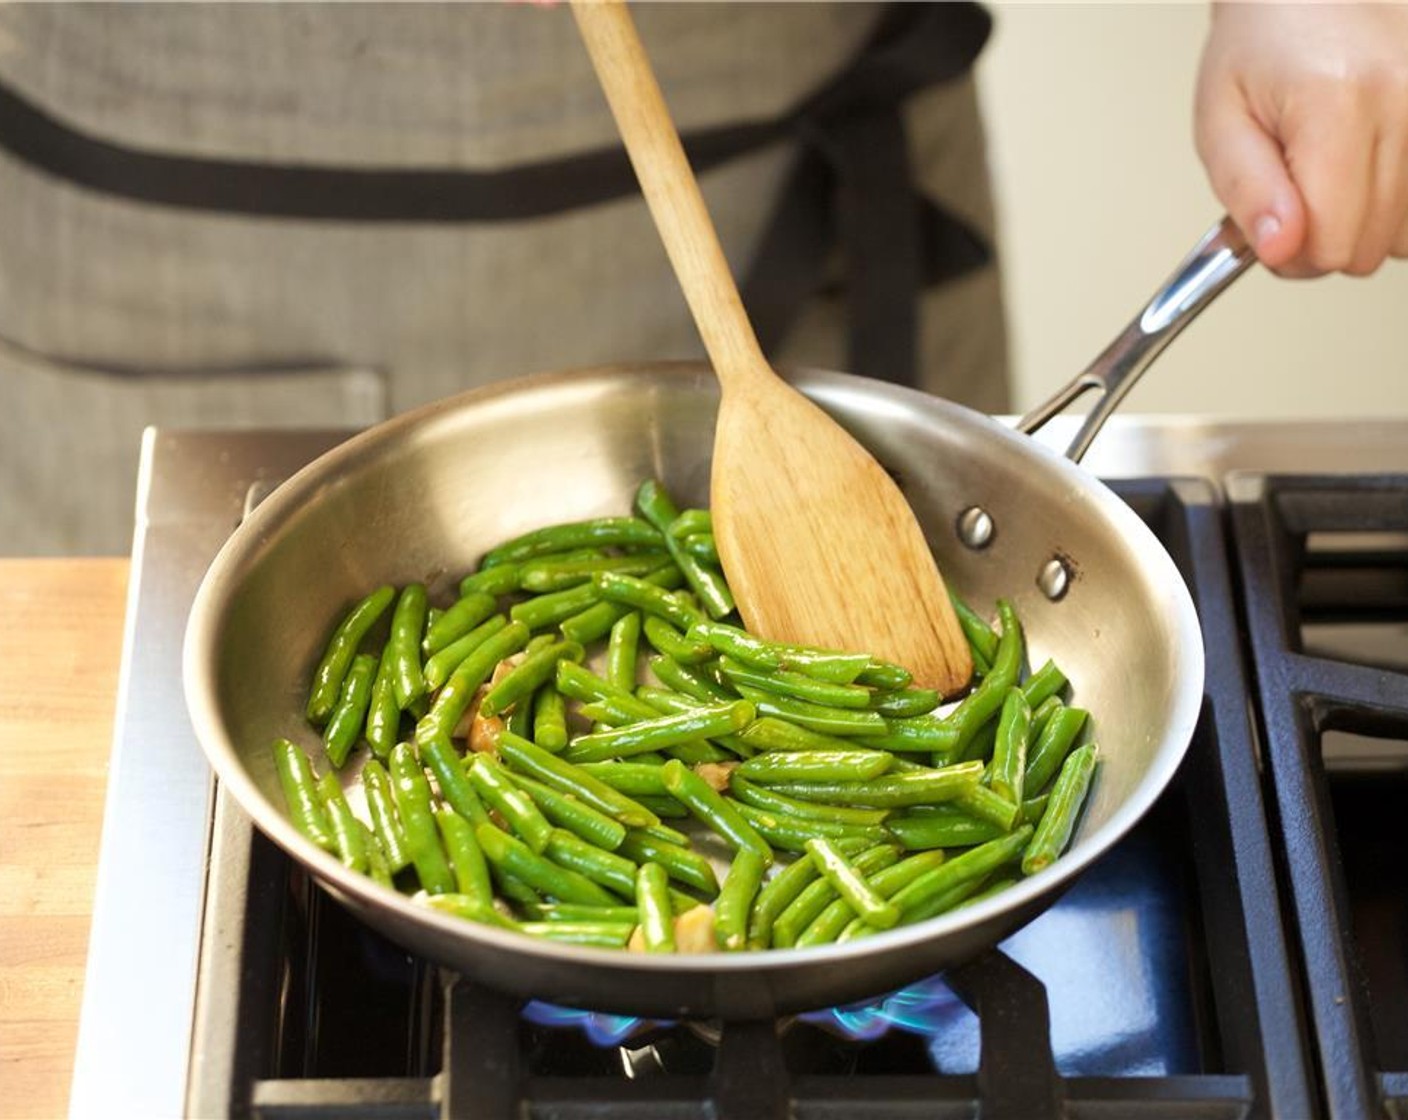 step 8 Heat a medium saute pan over high heat. When hot, add one tablespoon of canola oil. Add the garlic cloves and saute for ten seconds until aromatic. Add the green beans and cook for one minute.